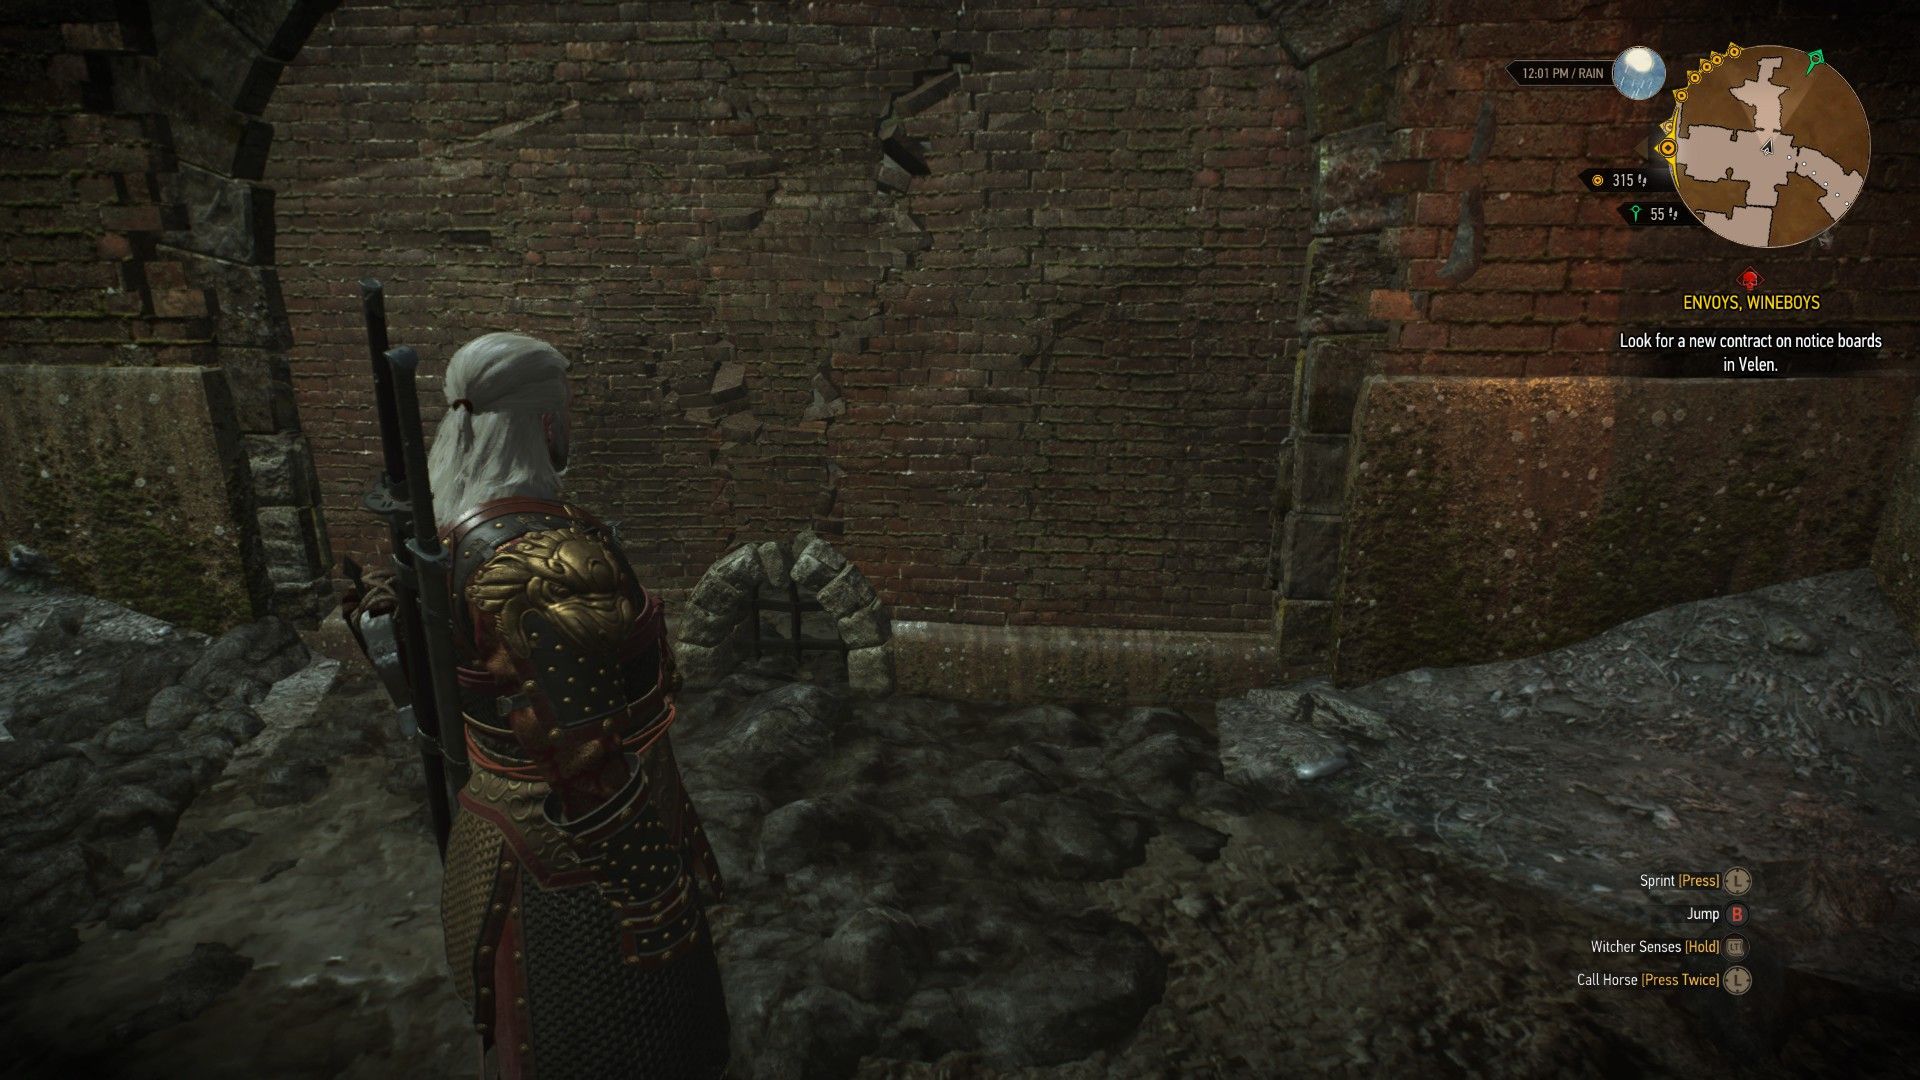 A screenshot of Geralt standing in front of a crumbling brick wall in Novigrad's sewers.